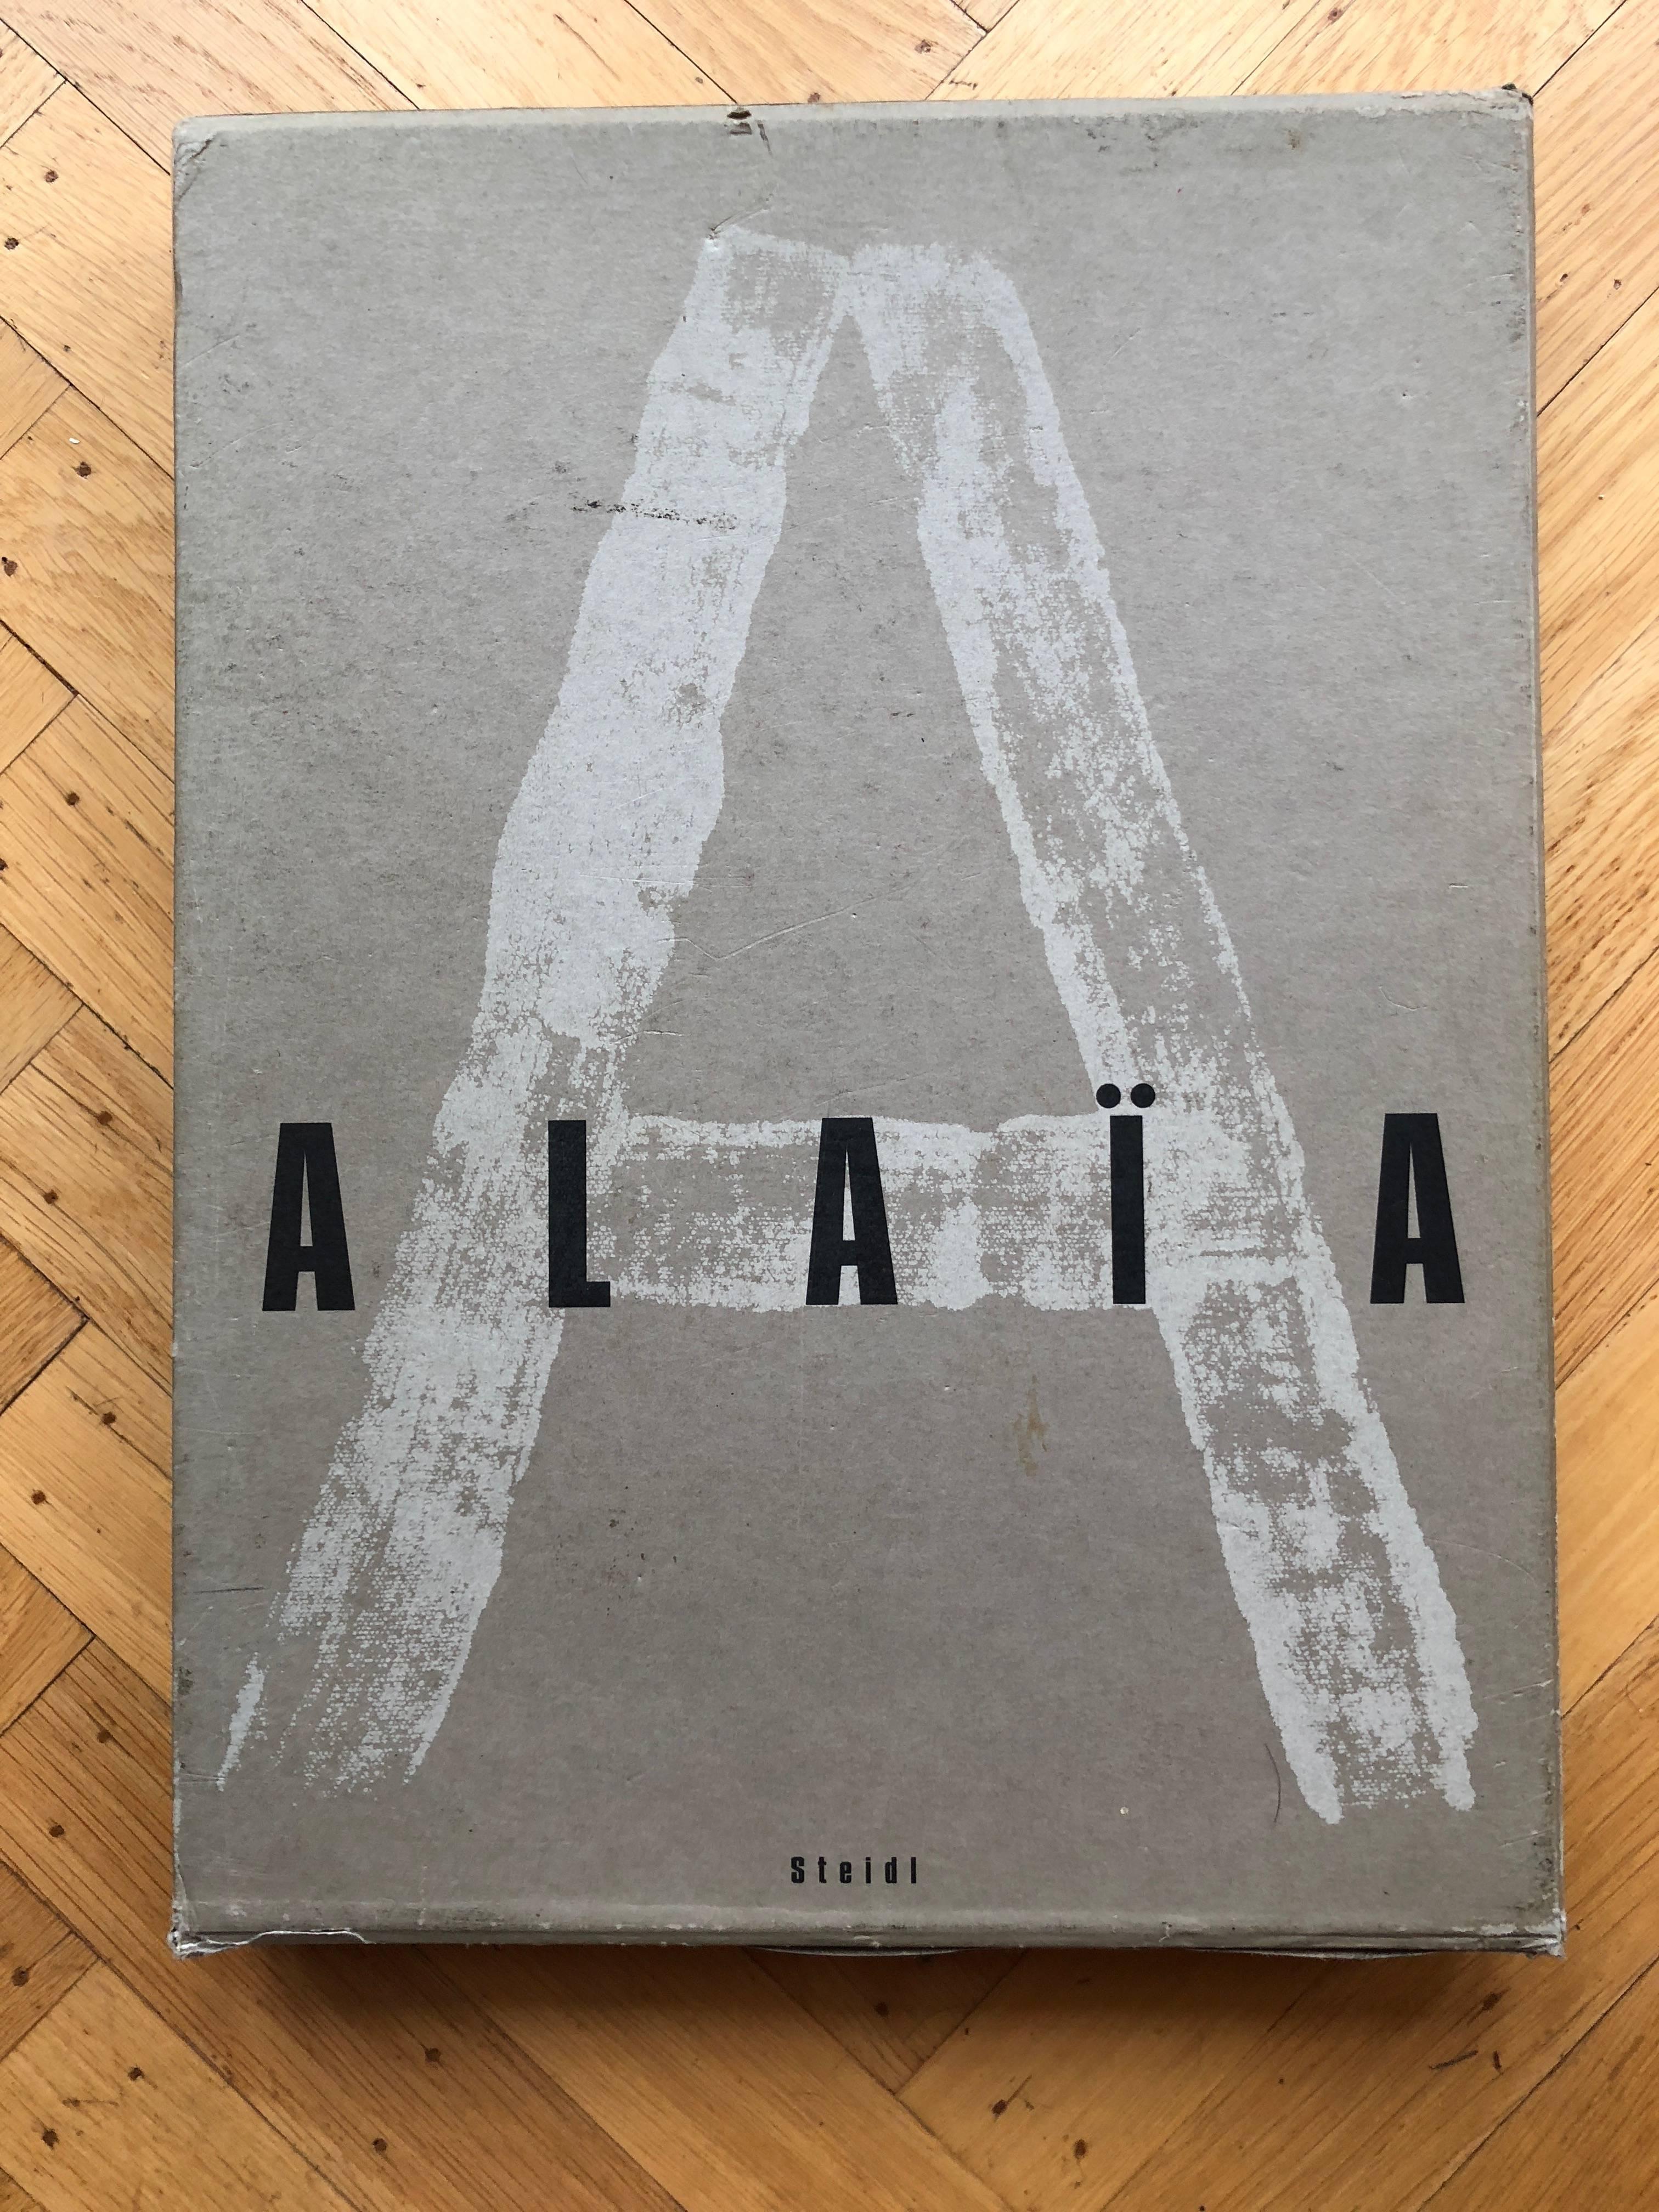 This huge and unusual book-object was first conceived in 1987. Alaa has invited his personal friends and his photographers to a party-a party that only takes place in this book. The guests tell stories about life, love, children, and of course the